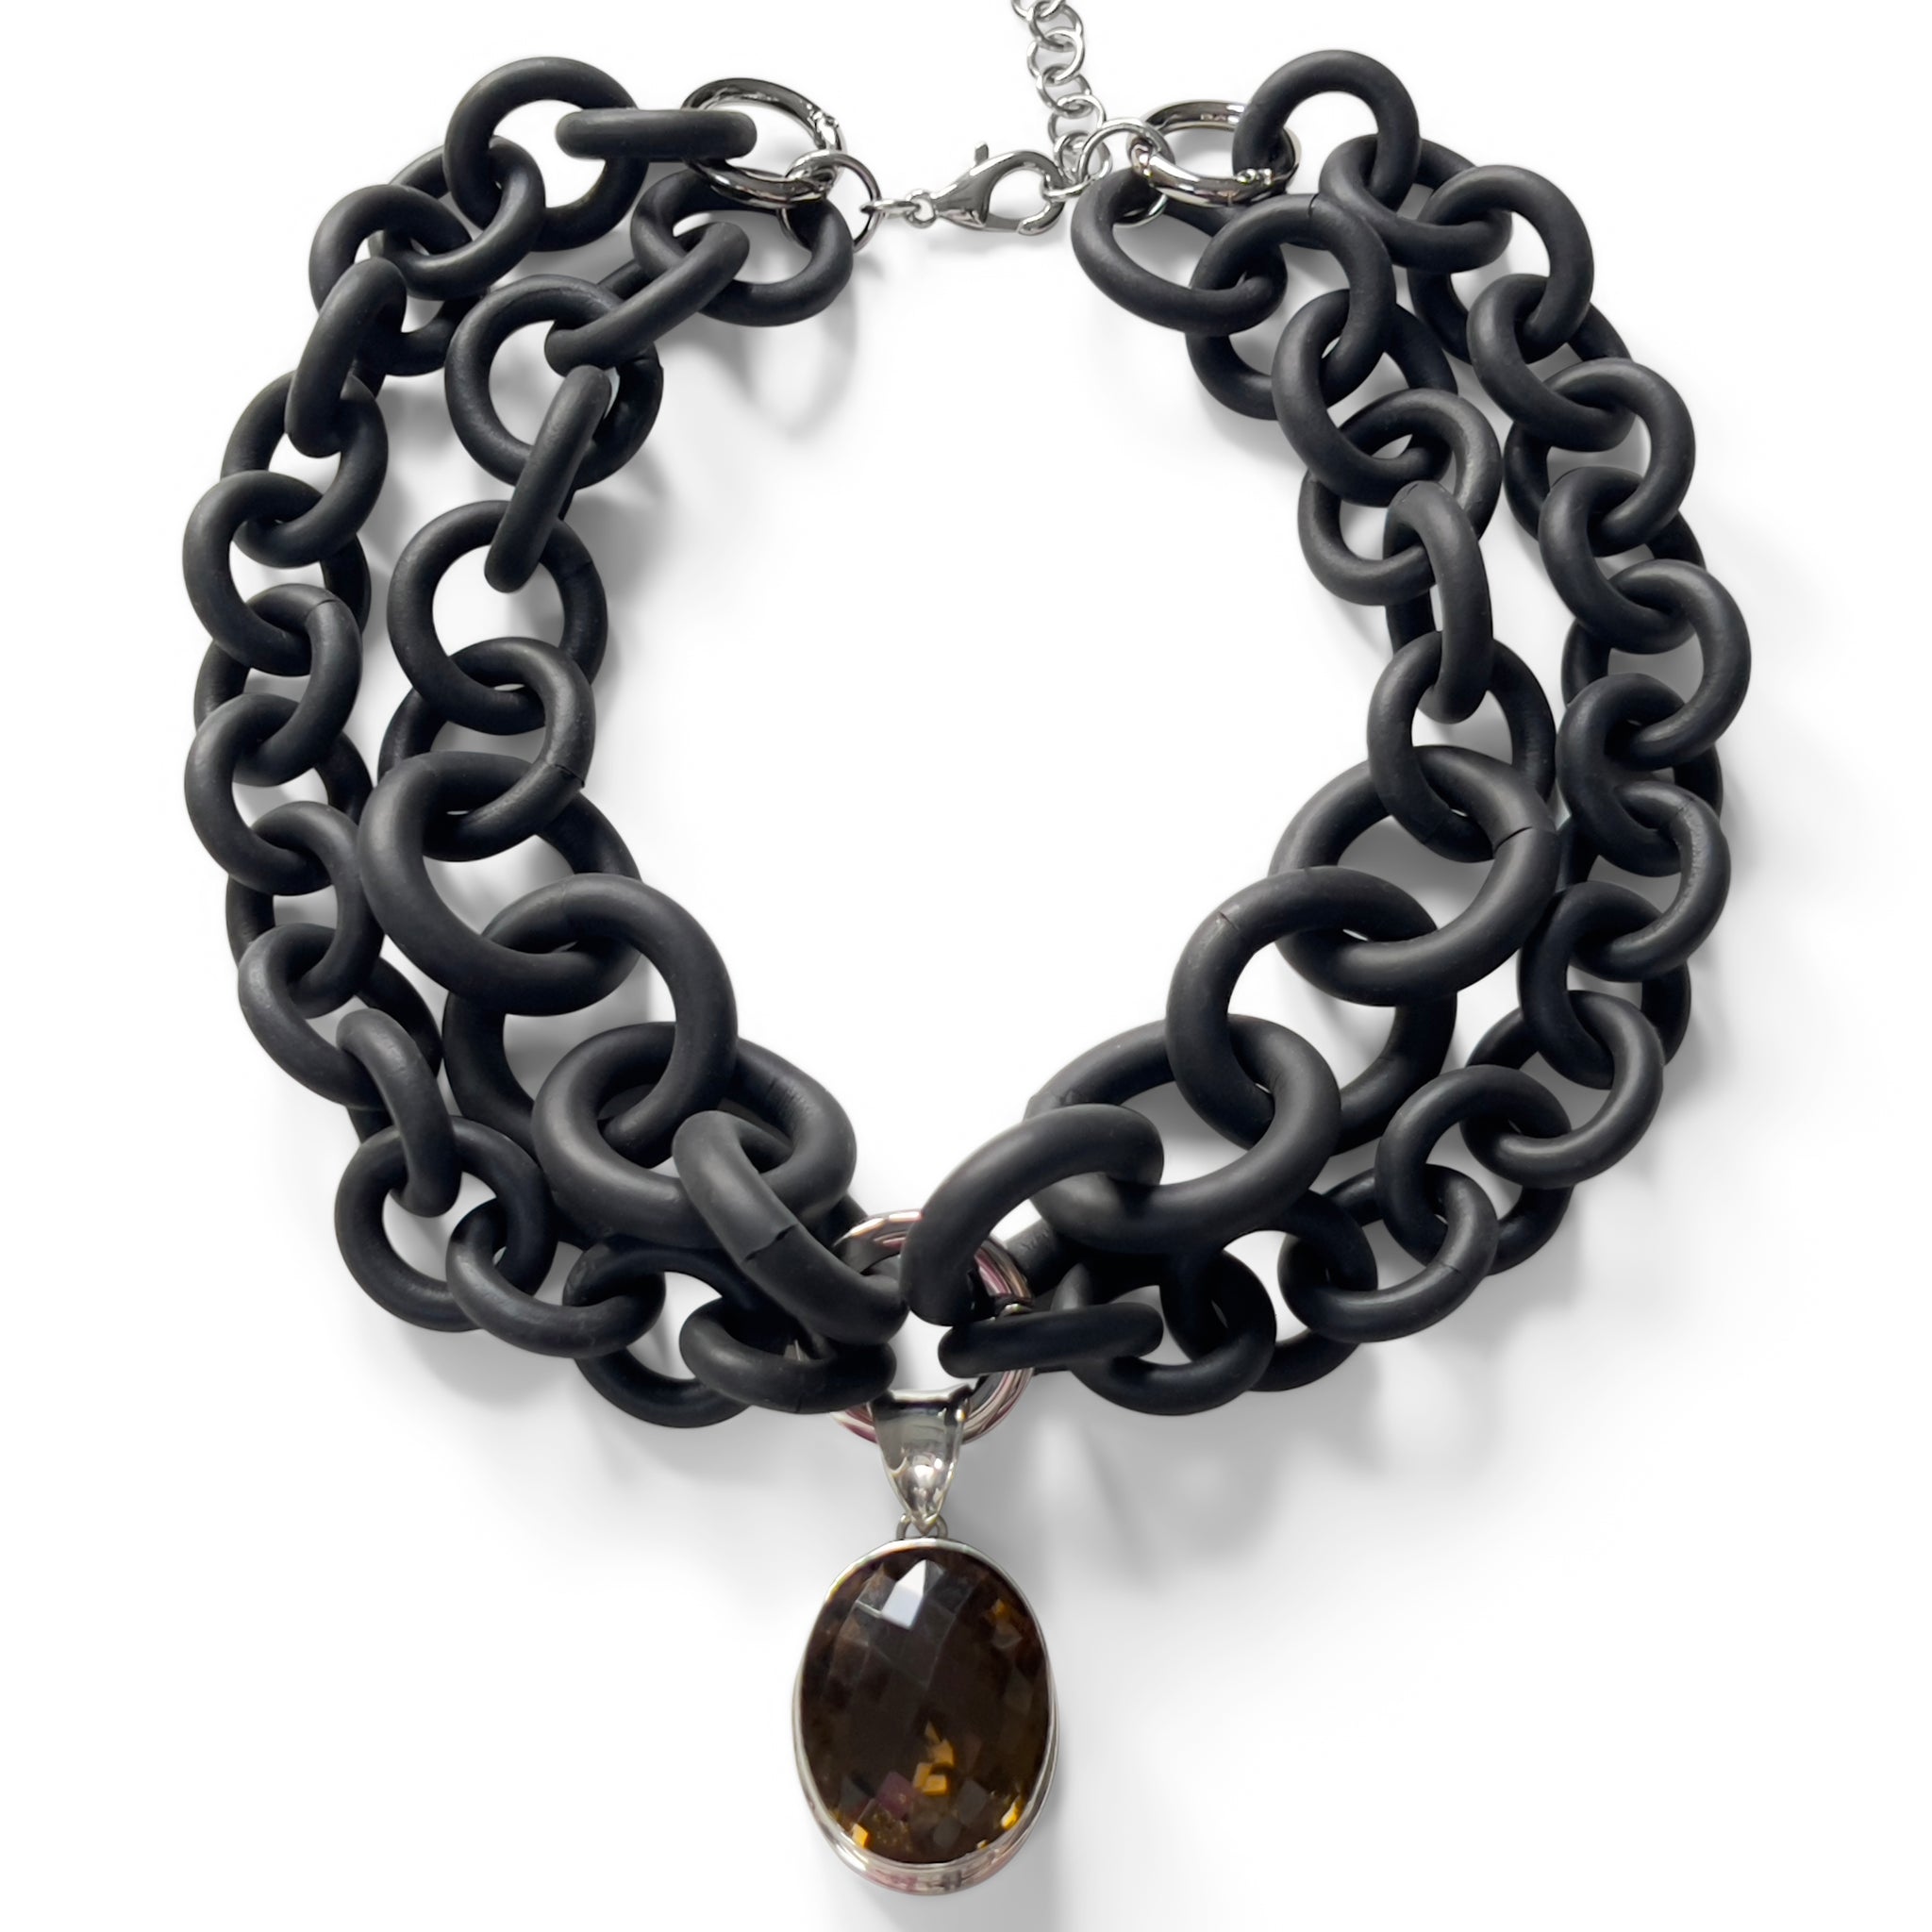 2-STRAND BLACK RUBBER NECKLACE WITH AN EXTRA LARGE LEMON TOPAZ BEZEL SET IN SILVER. BY NYET JEWELRY.